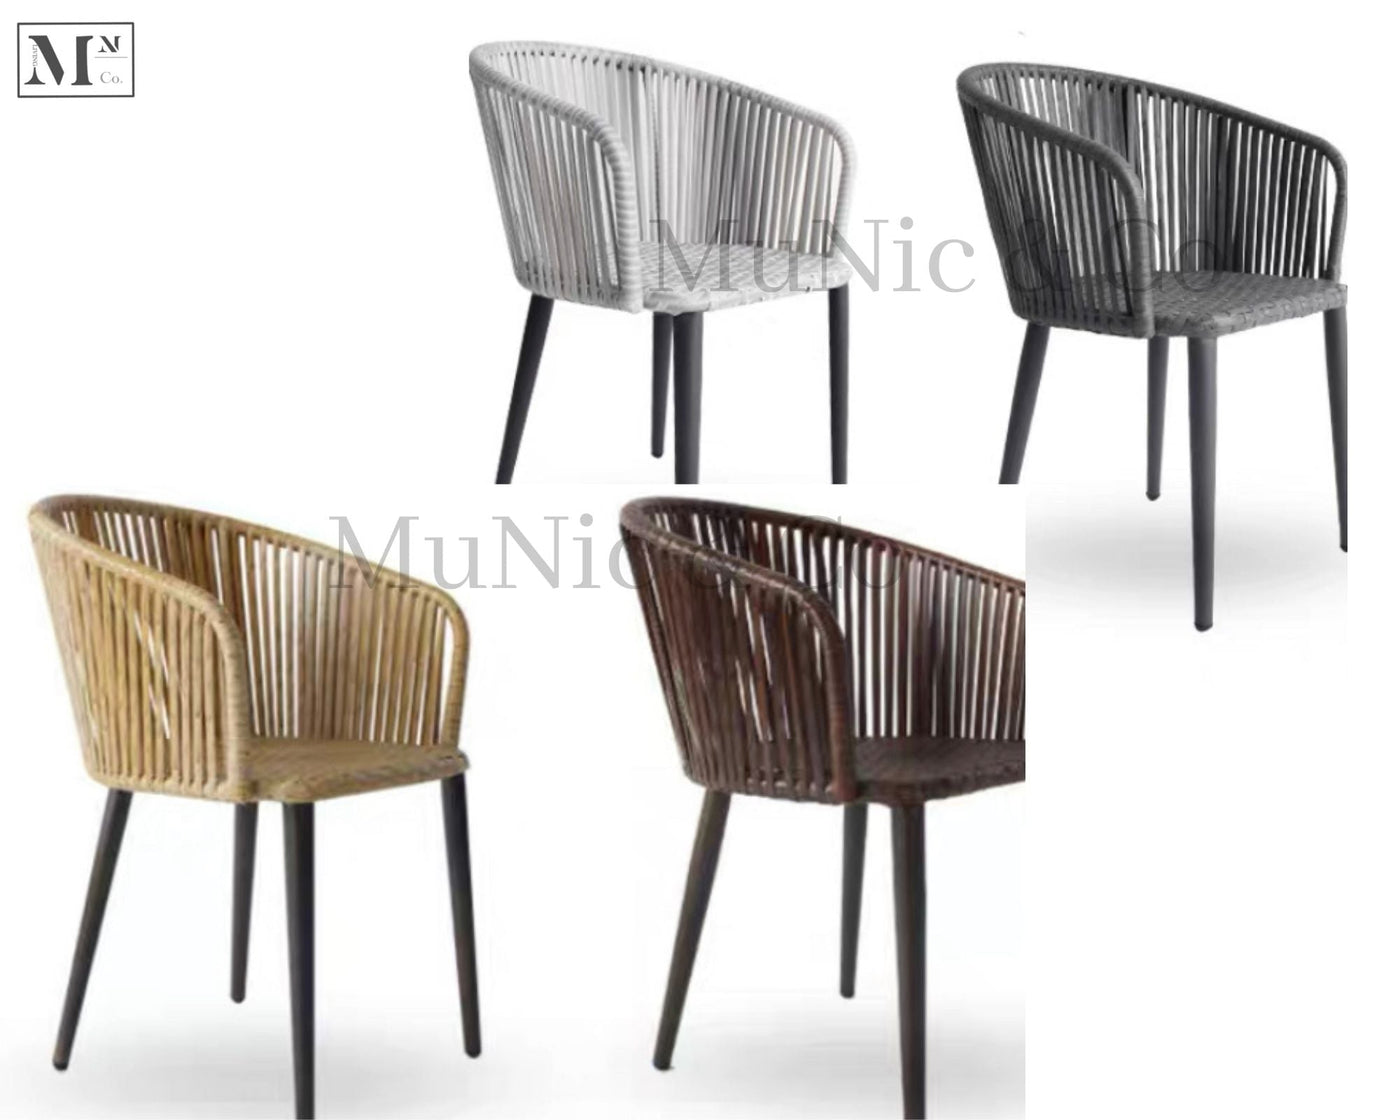 natura dining chair woven in pe rattan